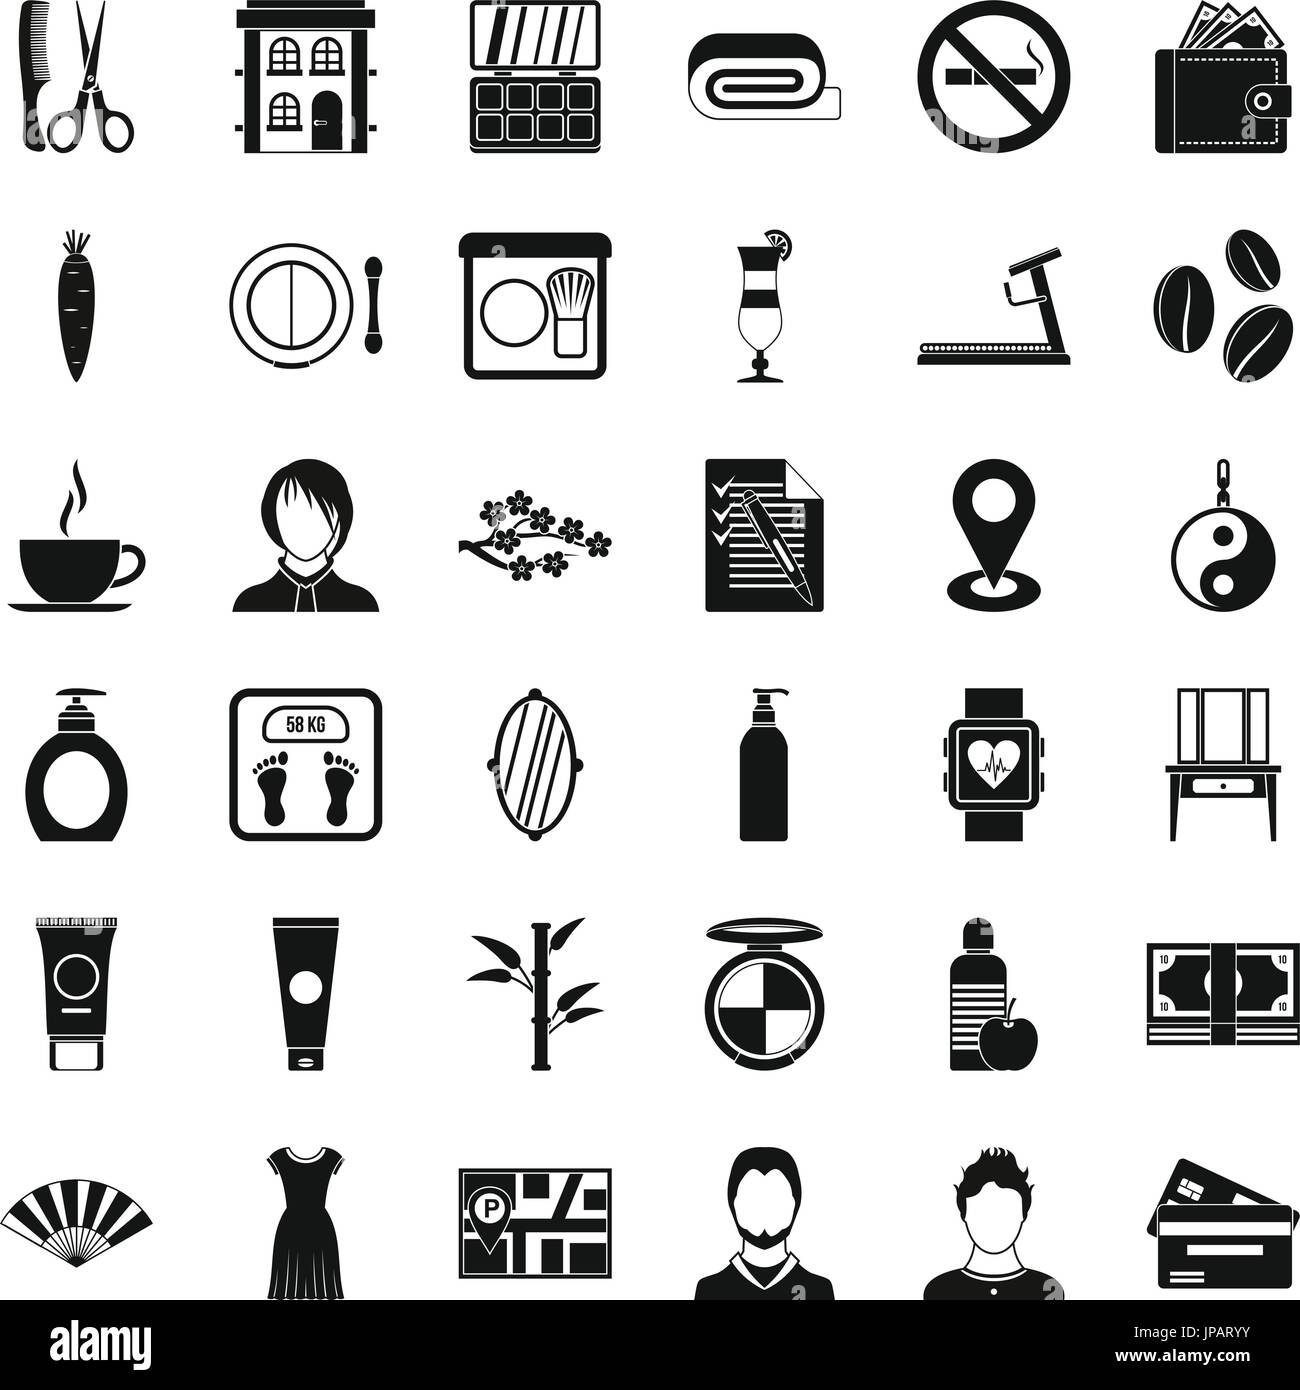 Hair style icons set, simple style Stock Vector